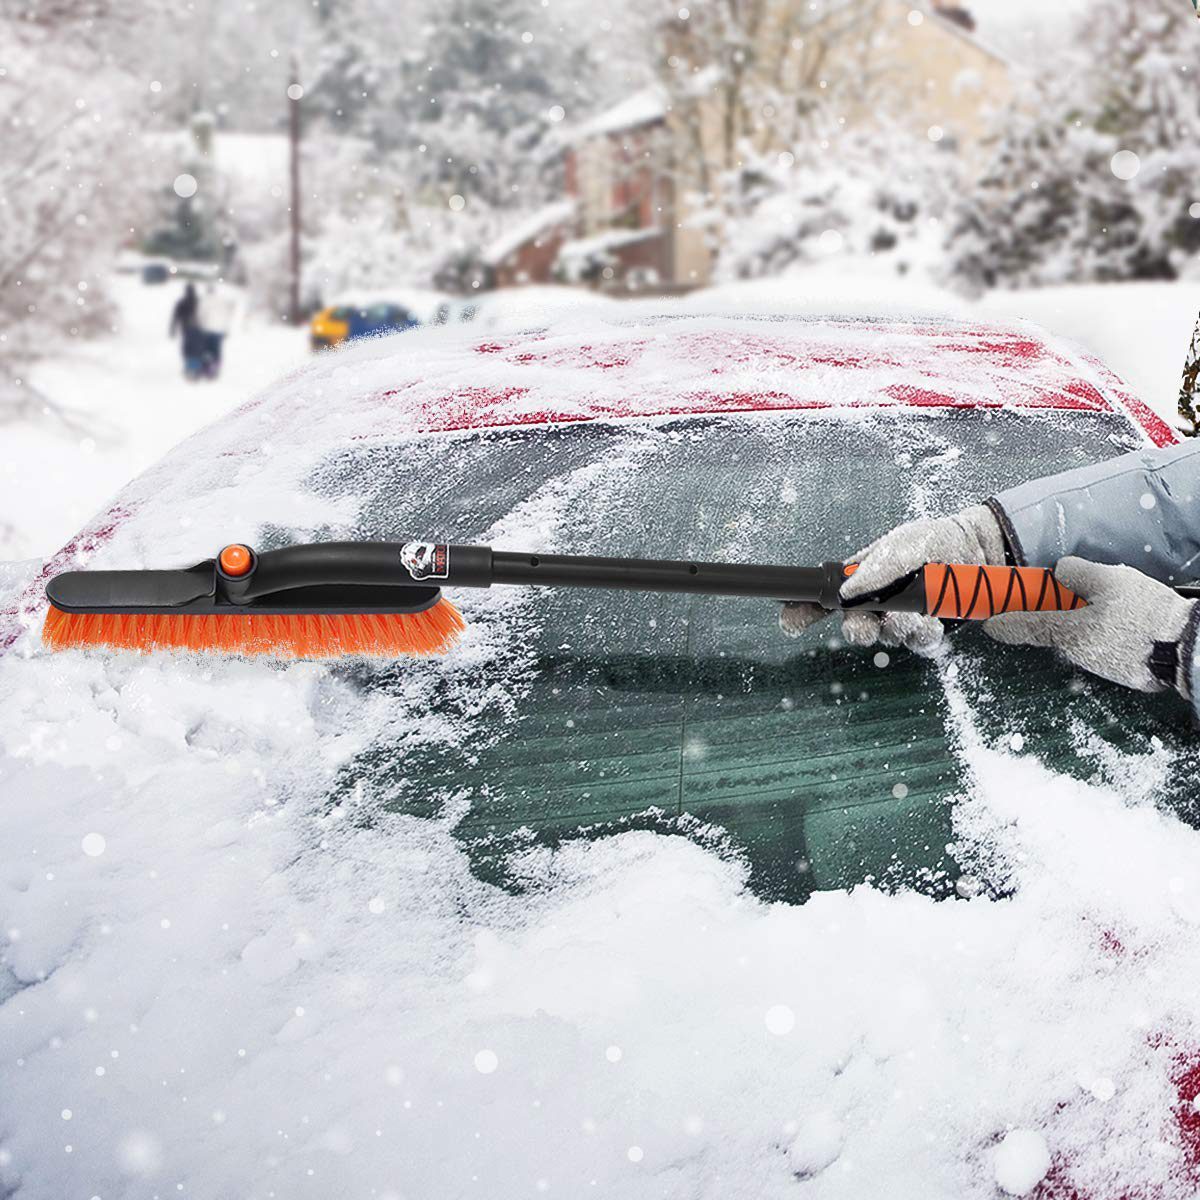 Scratch-free SUPERFA Ice Scraper for car plow-like Snow Scraper Heavy-duty Frost Snow Ice Removal for Windows Easily Storage Works Best on Any Size Vehicle. 